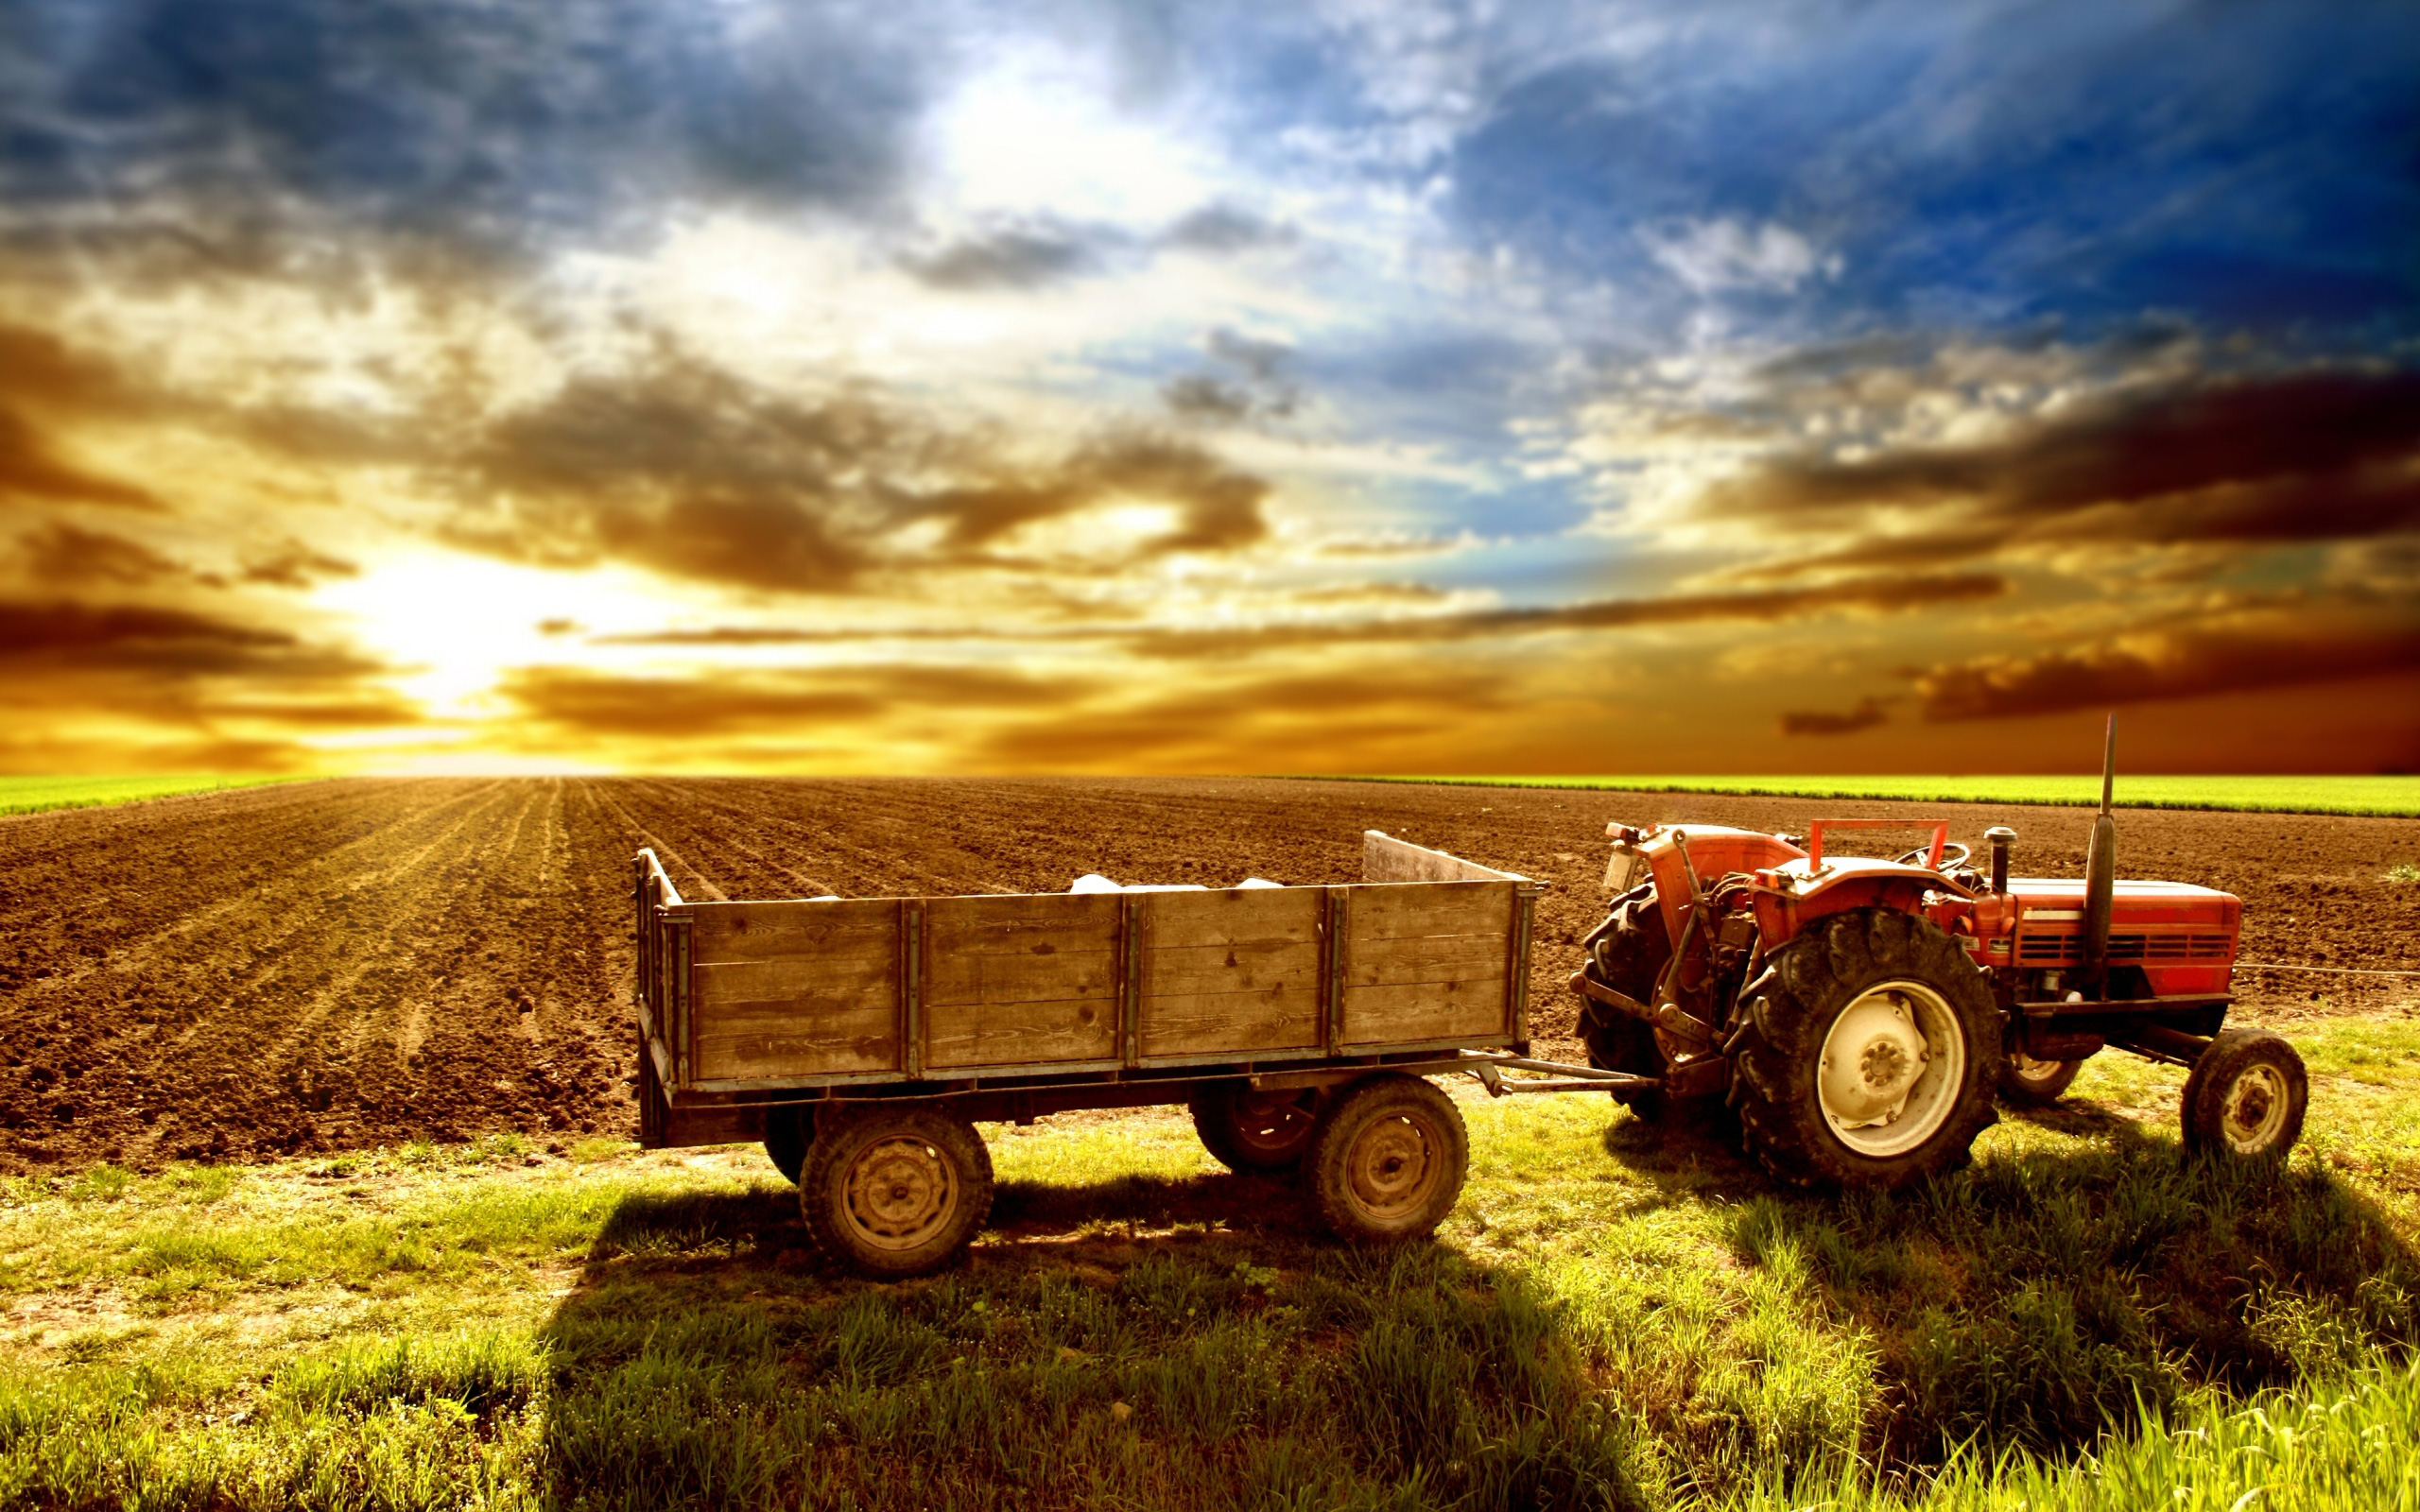 Pin Tractor With Trailer 2560x1600 16 10 Back To Wallpaper Home on